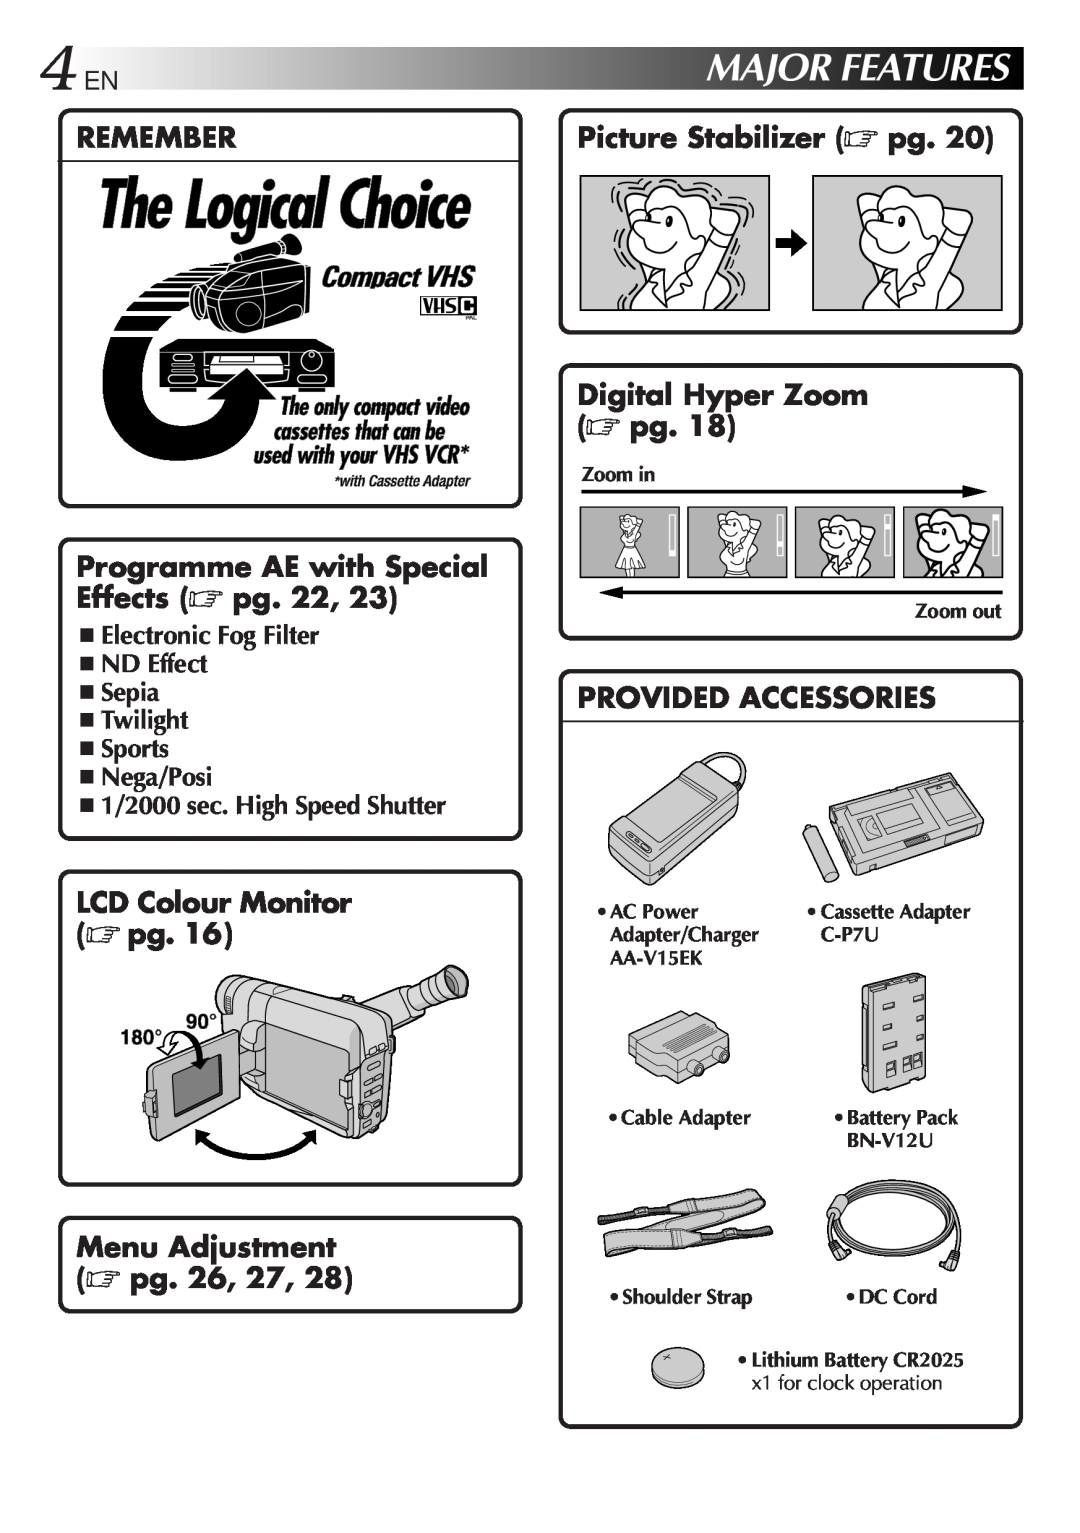 JVC GR-FXM15 4ENMAJORFEATURES, REMEMBER Programme AE with Special Effects pg. 22, Provided Accessories, Zoom in Zoom out 